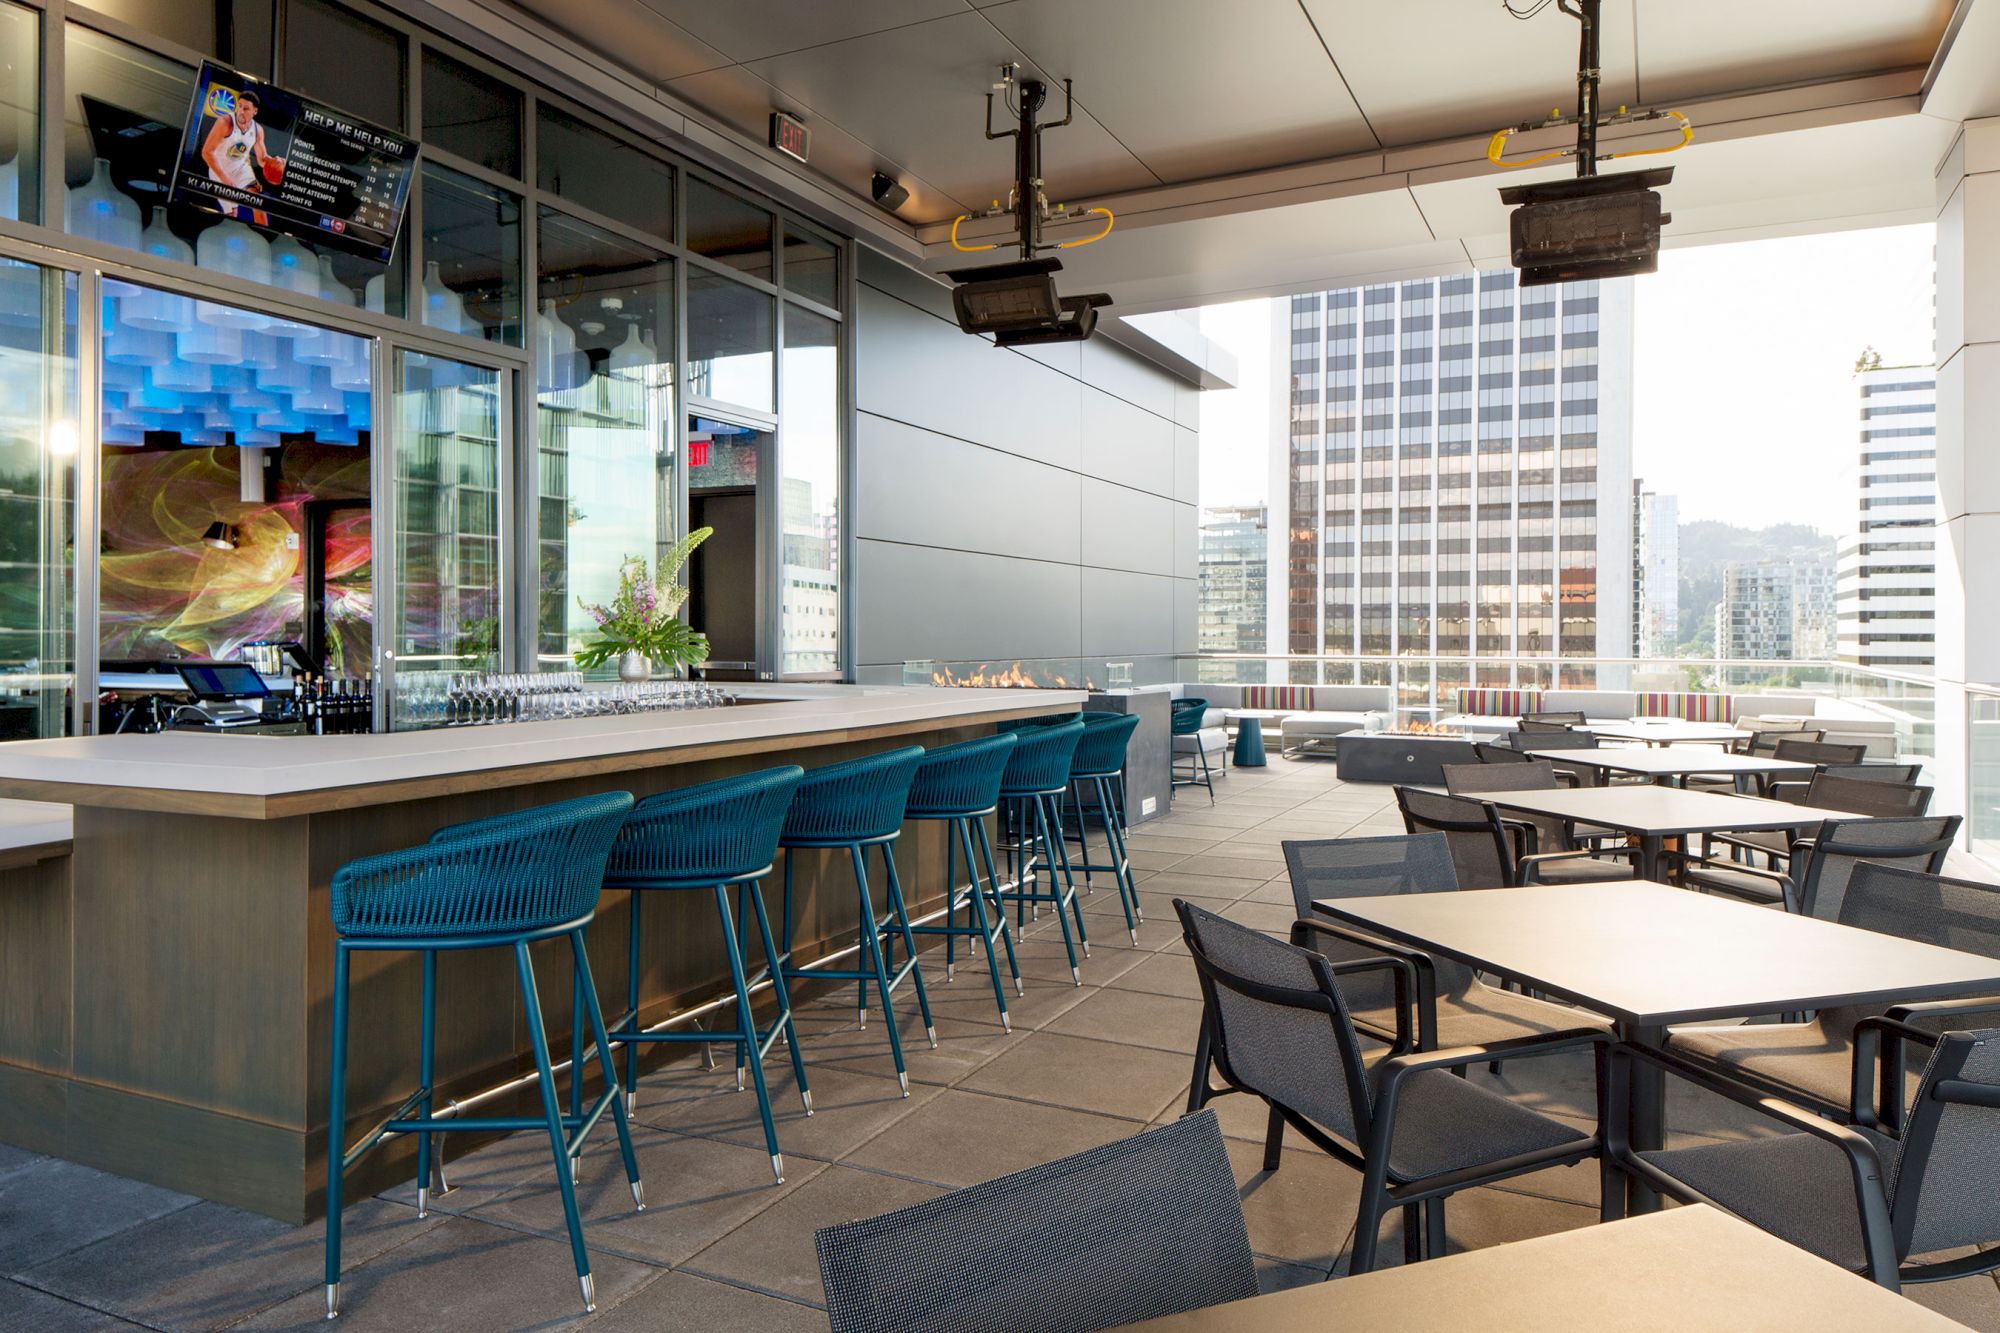 This image shows a modern rooftop bar with bar stools, tables, and chairs. It overlooks city buildings on a bright day.